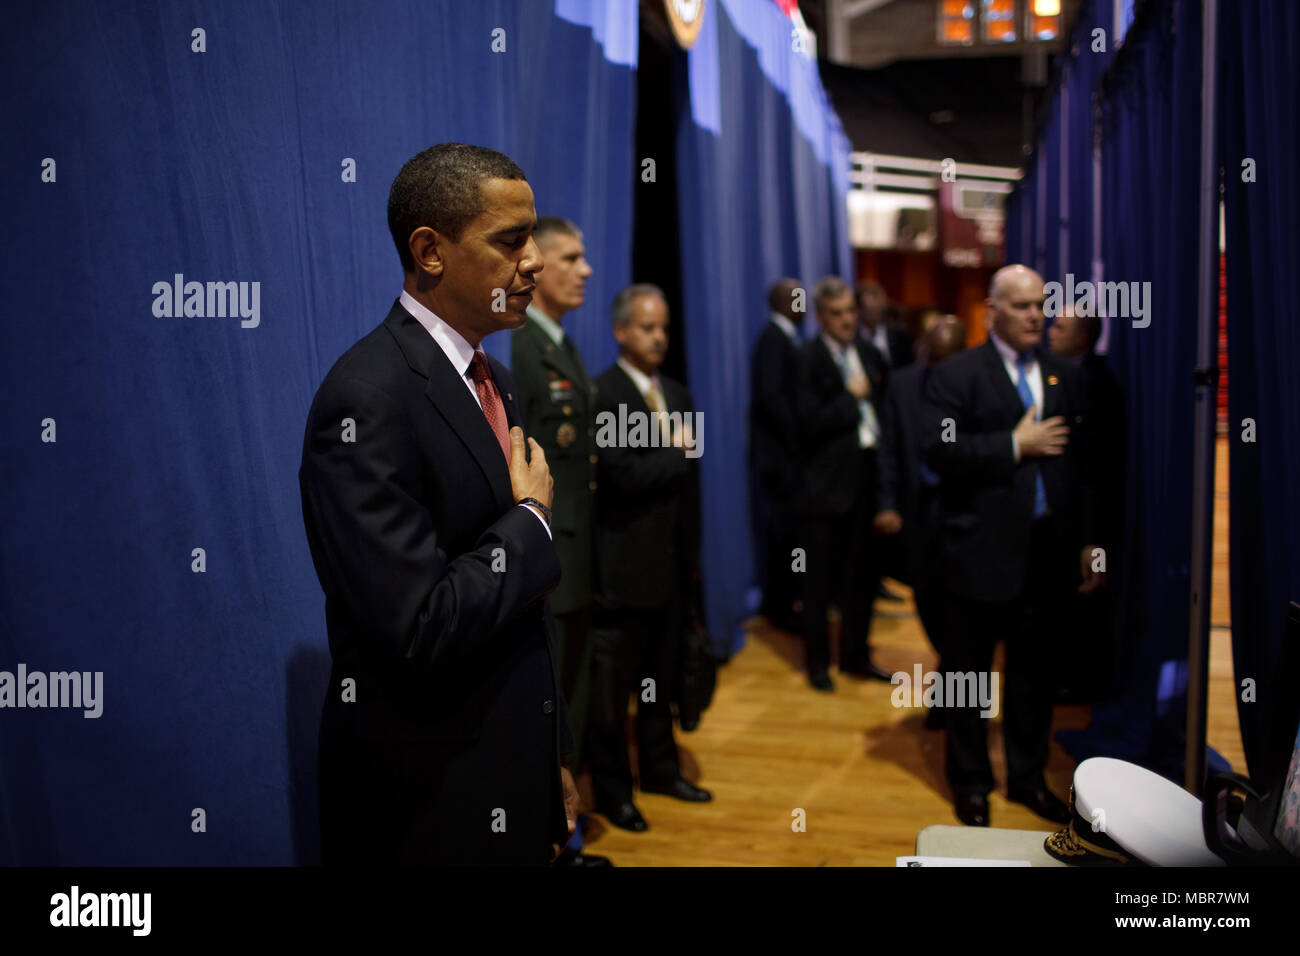 Before giving a policy speech on Iraq, President Barack Obama places his hand on his heart as the national anthem is played backstage  at the Field House, Camp Lejeune, North Carolina 2/27/09. .Official White House Photo by Pete Souza Stock Photo